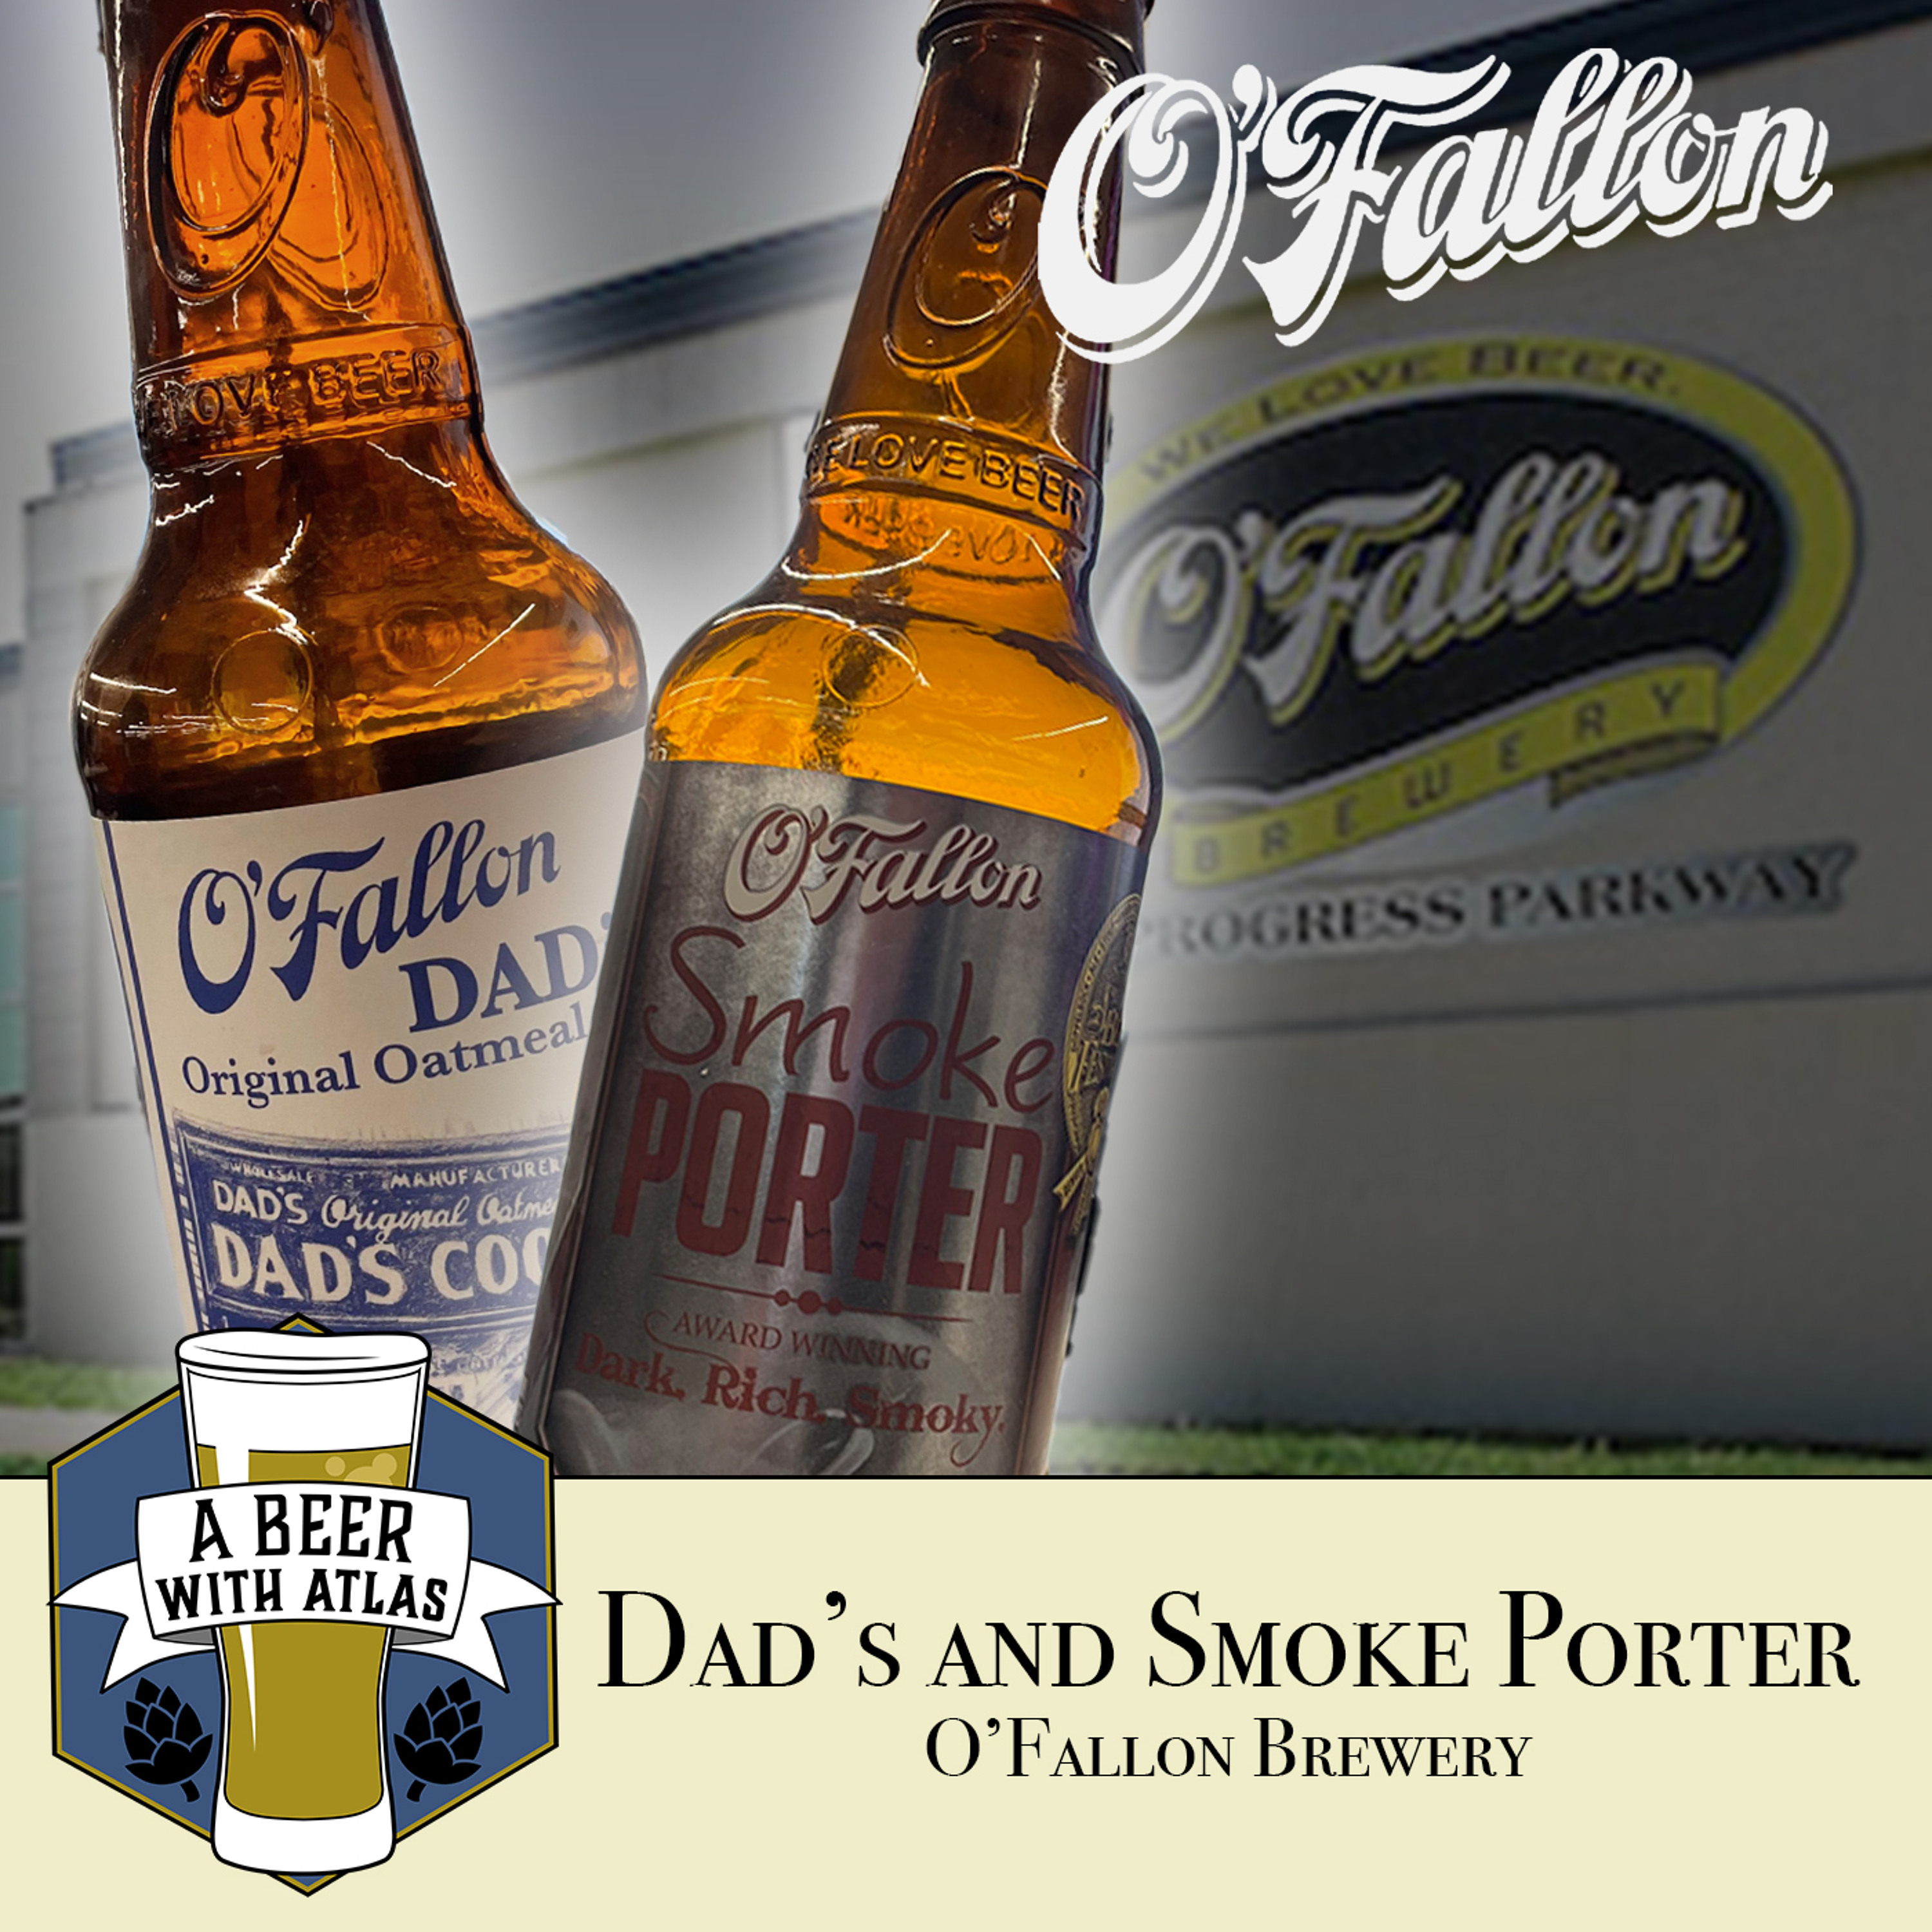 Dad's original Oatmeal Stout and Smoke Porter by O'Fallon Brewery - A Beer with Atlas 215